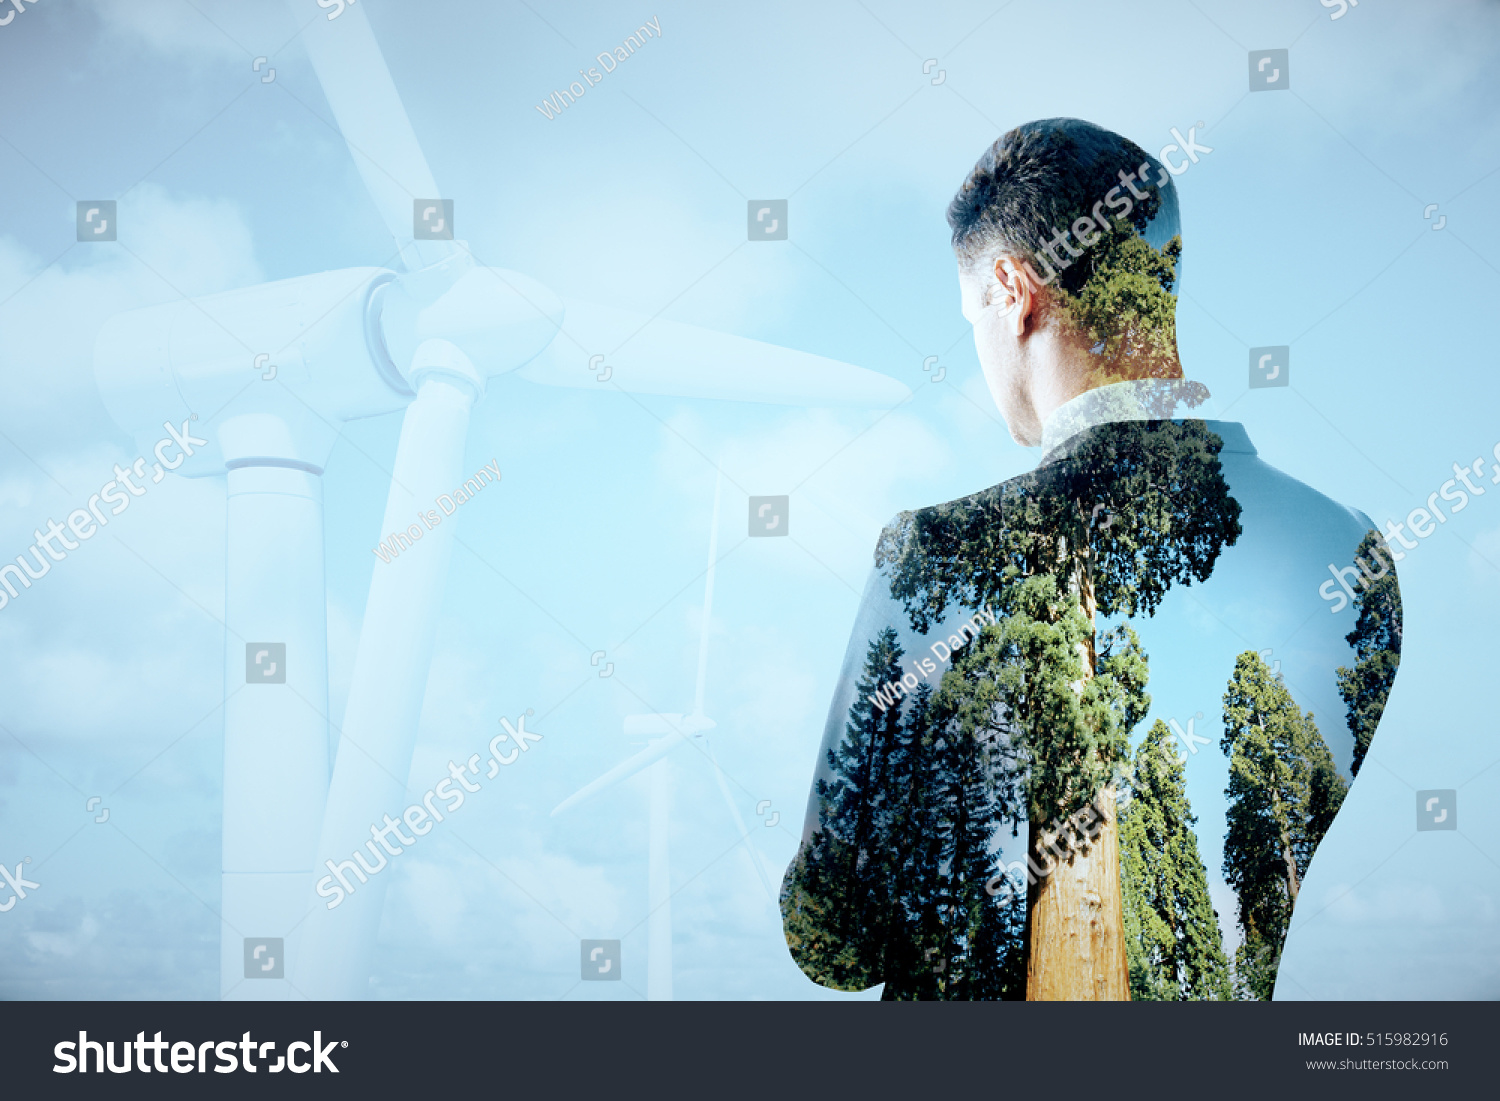 Thoughtful businessperson on sky background with wind mills. Double exposure. Eco friendly business concept #515982916